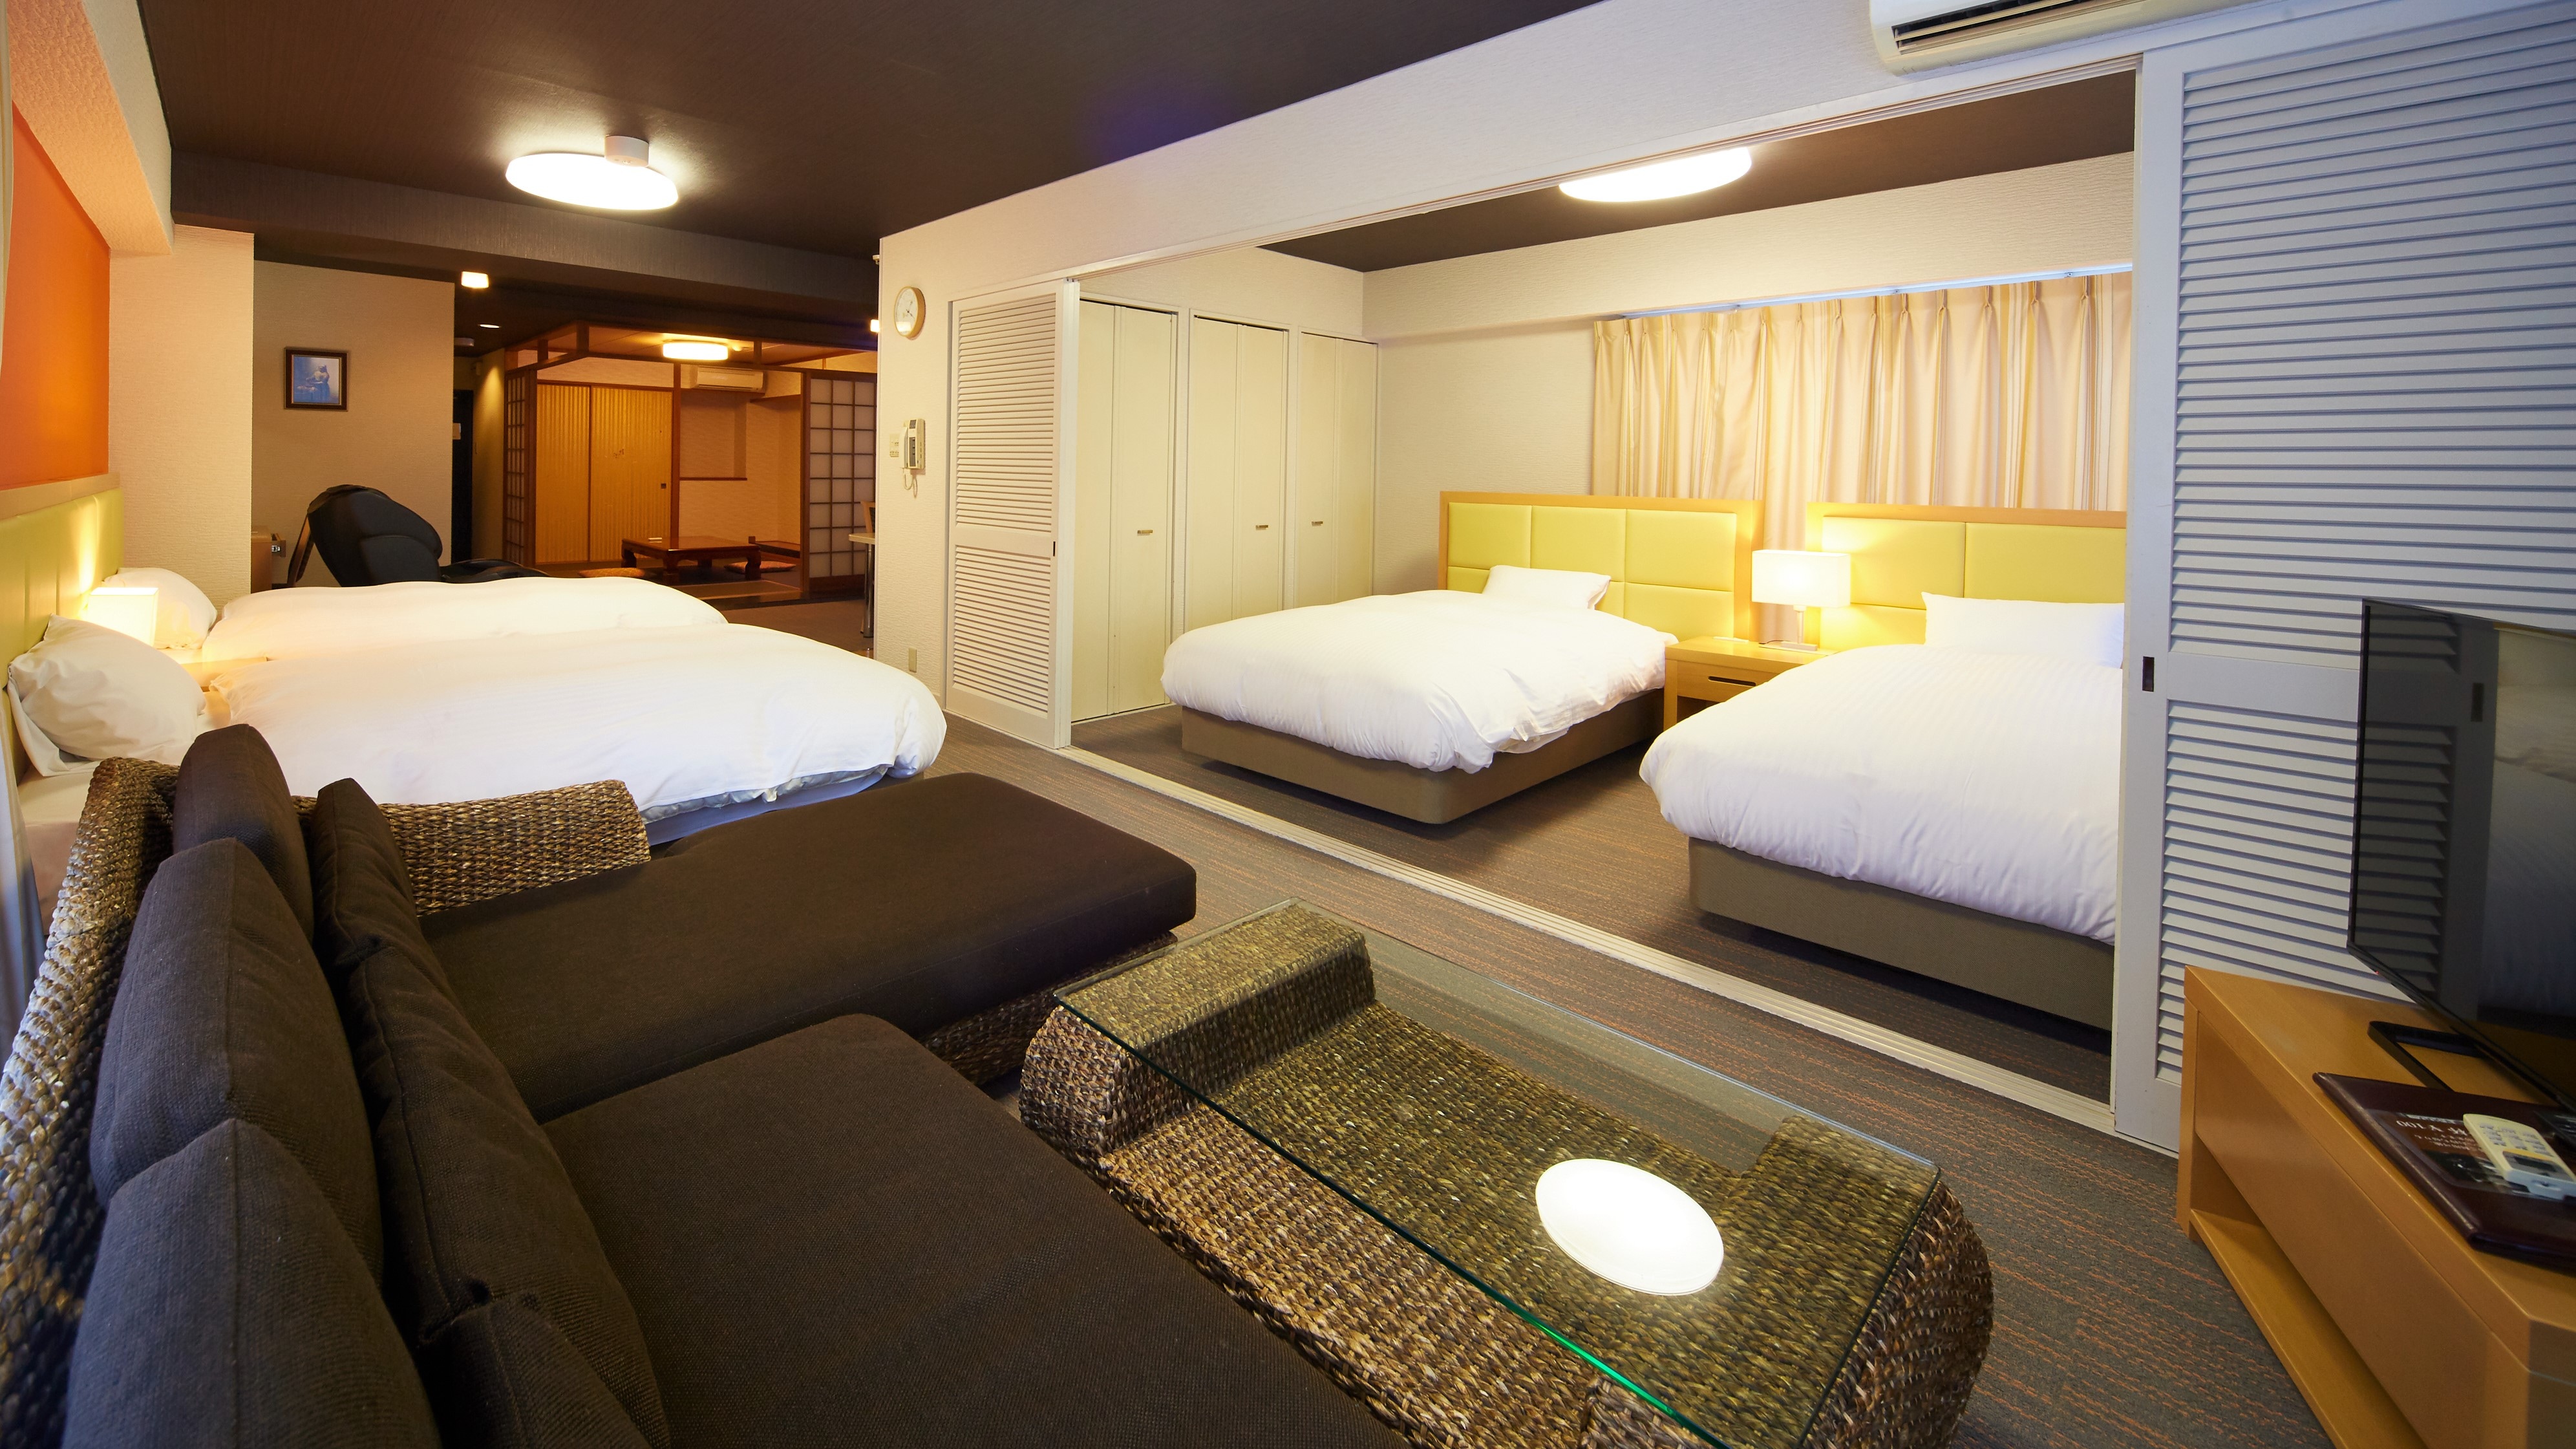 All rooms are Japanese and Western rooms. It is also recommended for group trips.